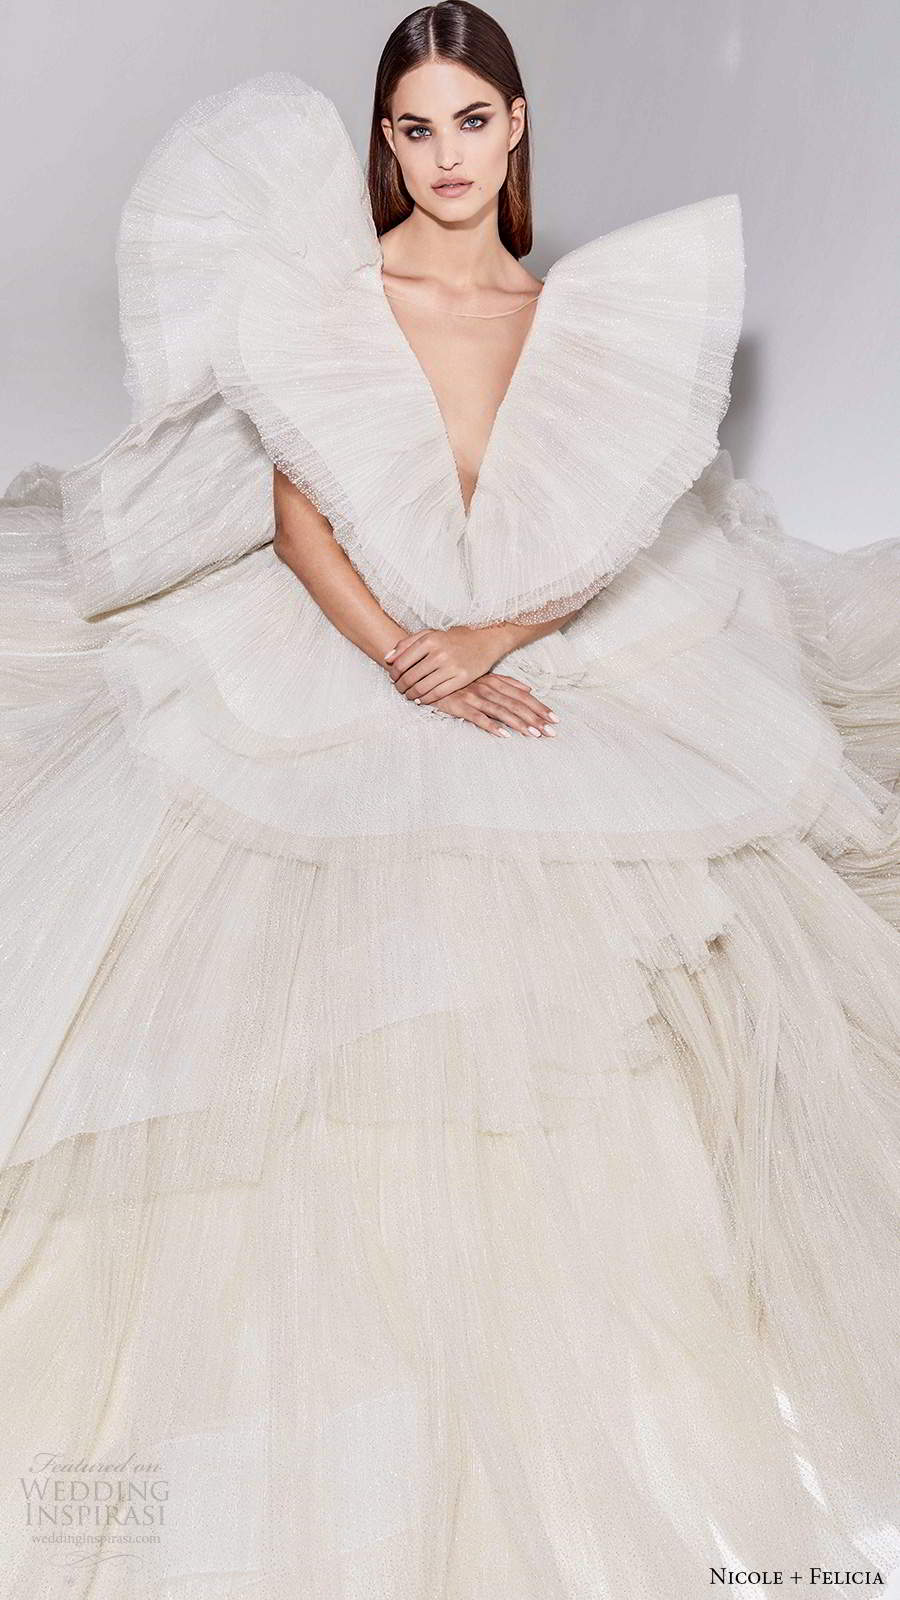 nicole and felicia fall 2020 bridal flutter sleeves plunging v neckline pleated bodice ball gown wedding dress tiered skirt (1) mv